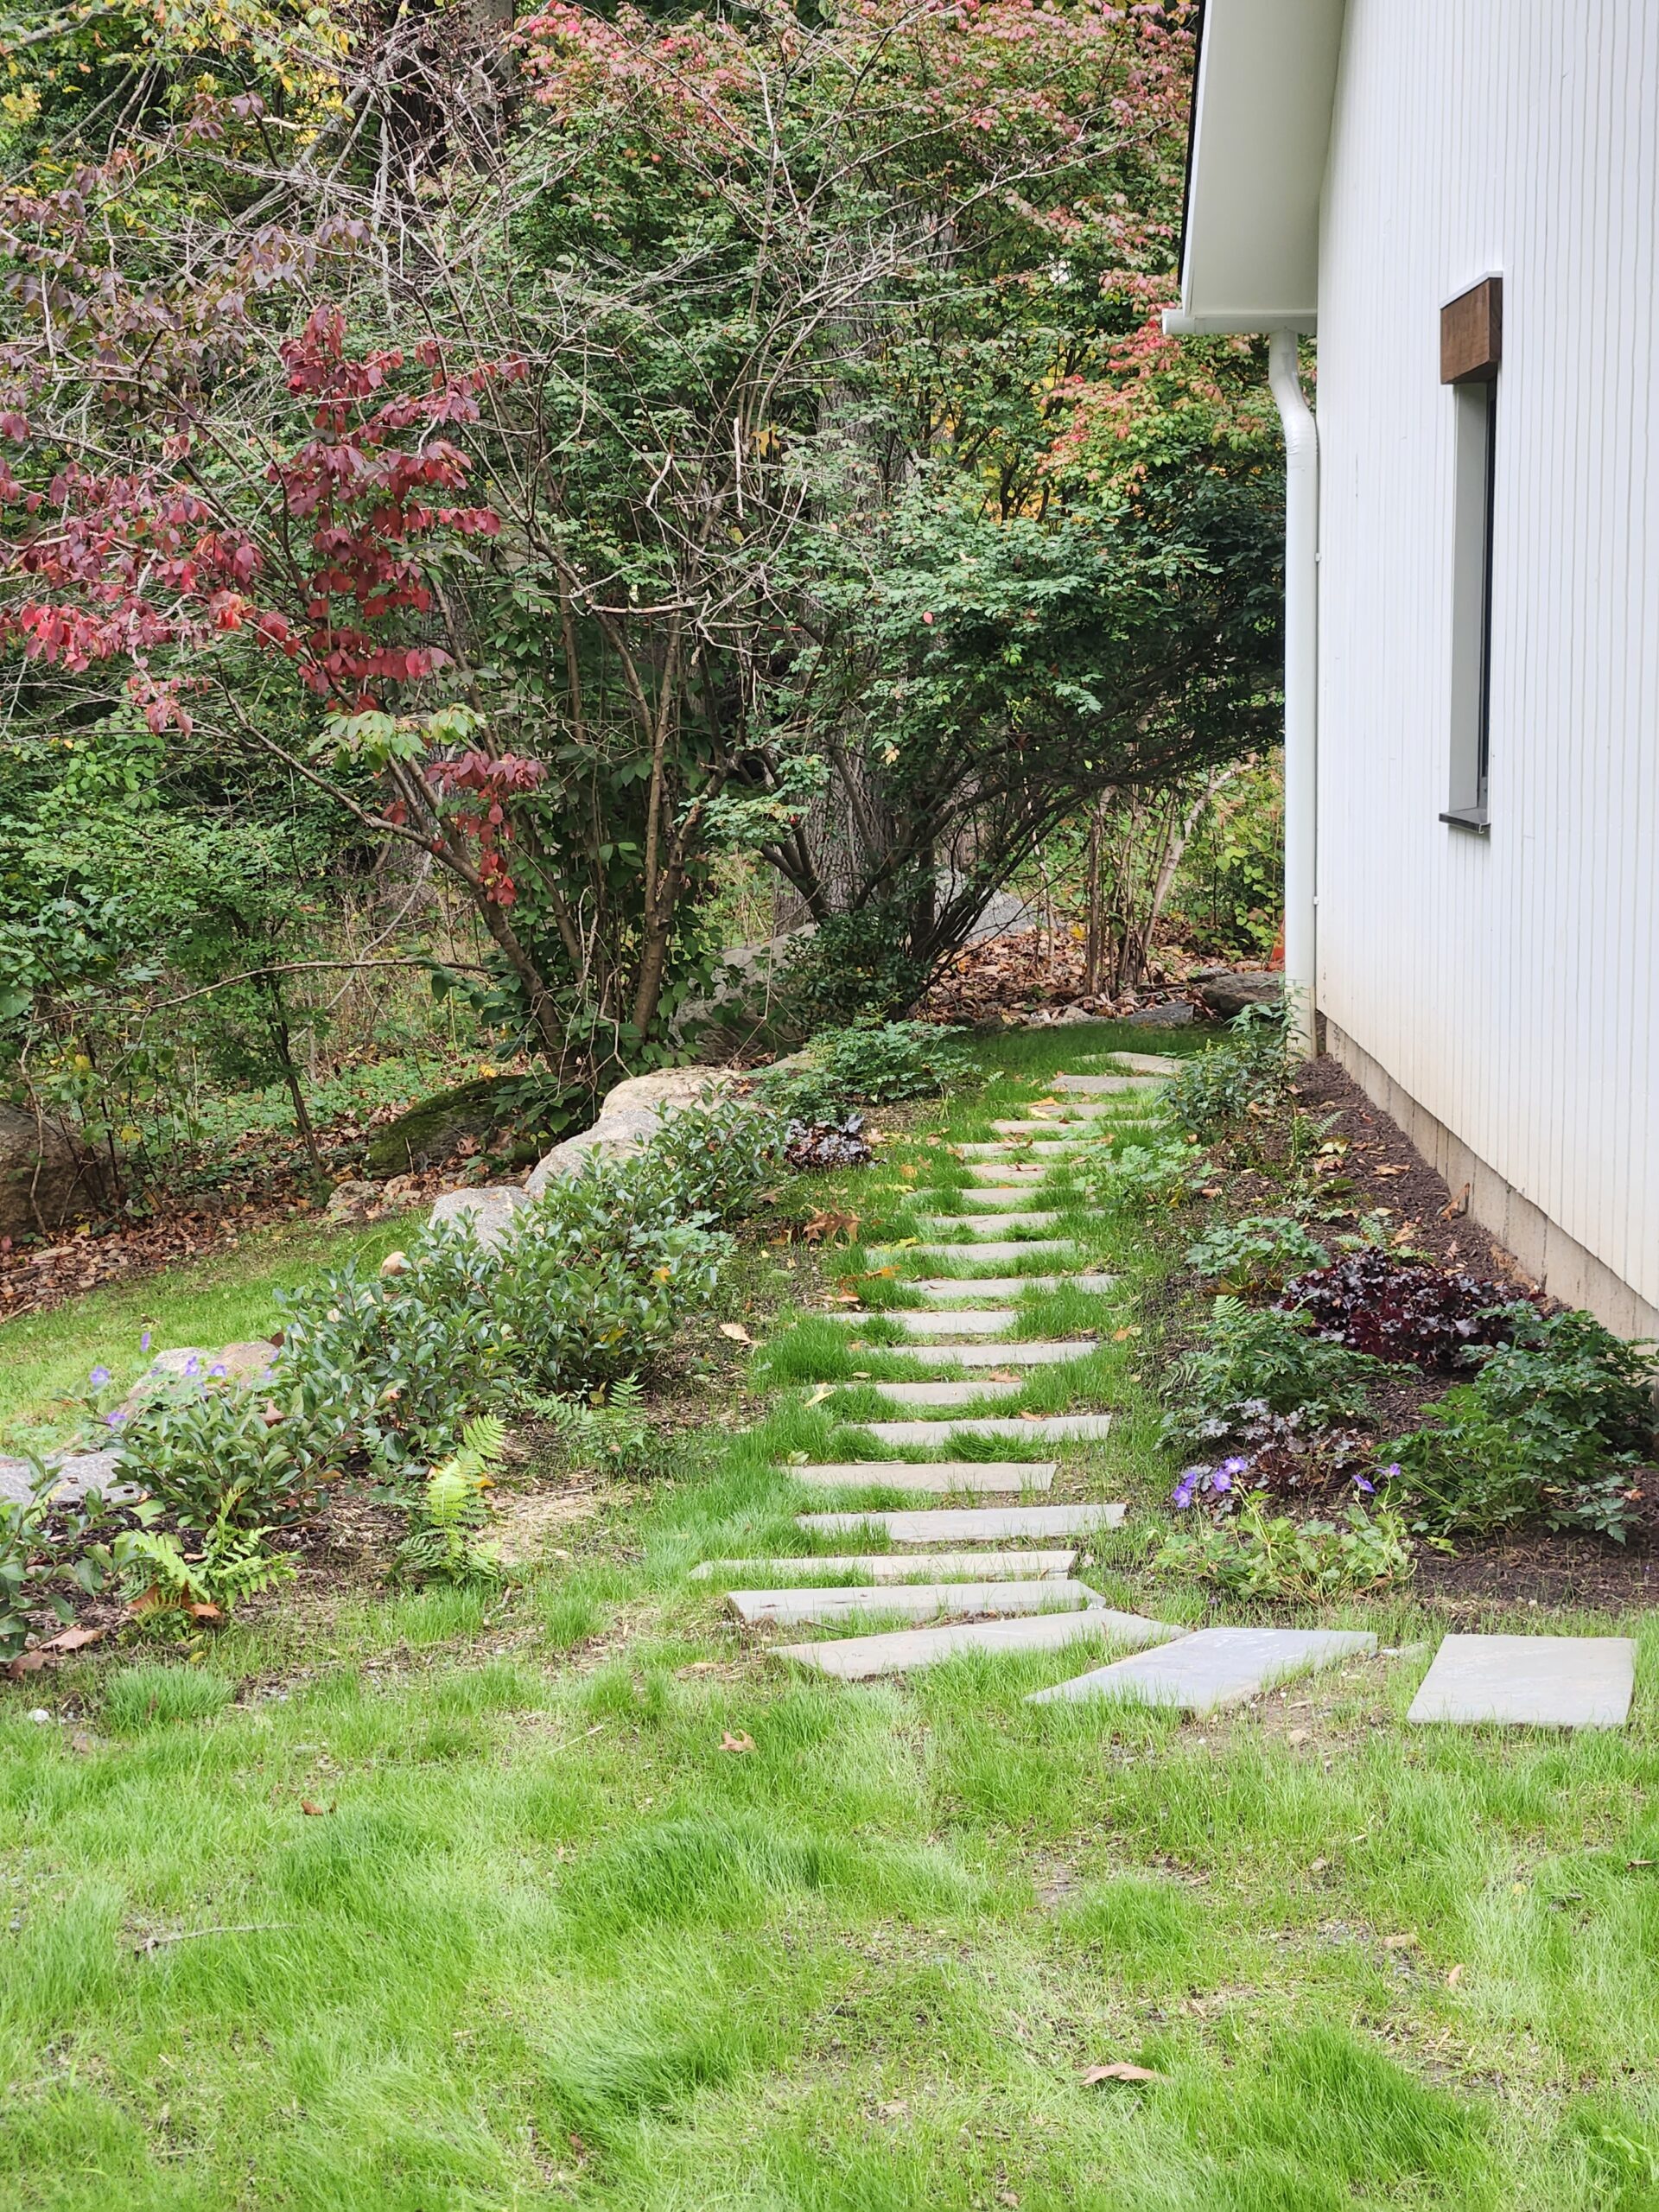 Native planting and steppingstone path leads around the garage to the shed.